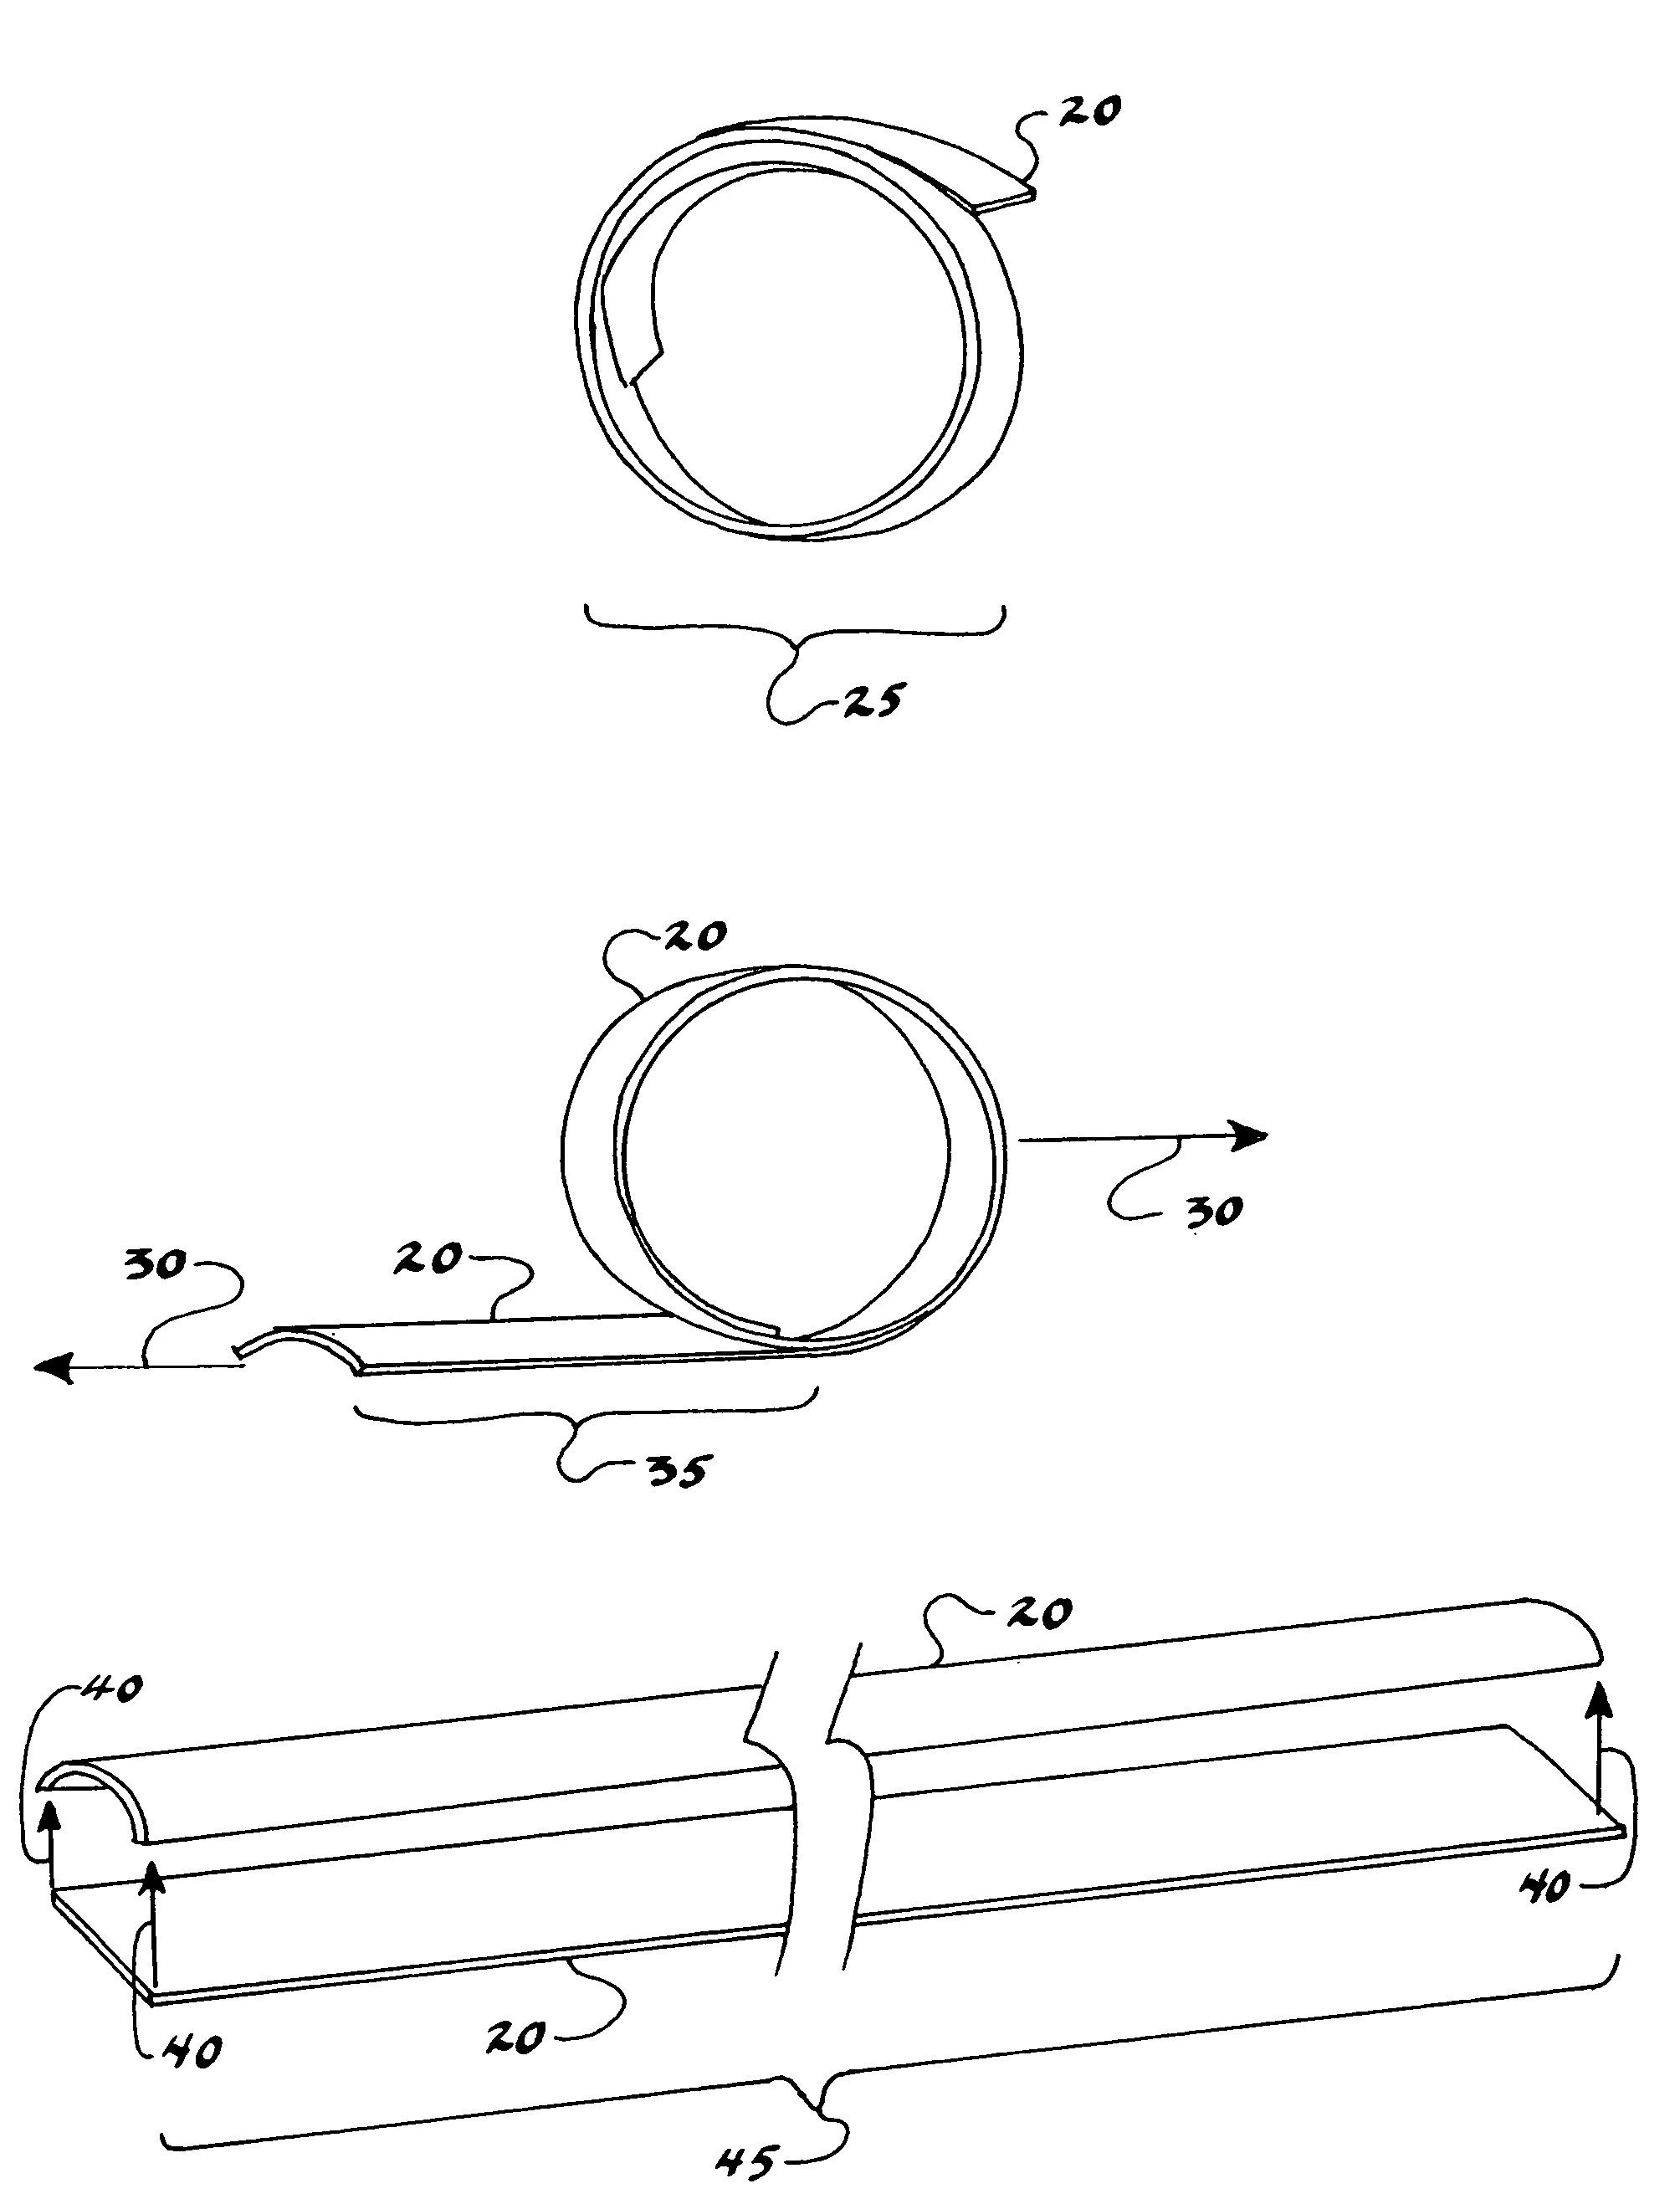 Devices incorporating a bi-stable ribbon spring